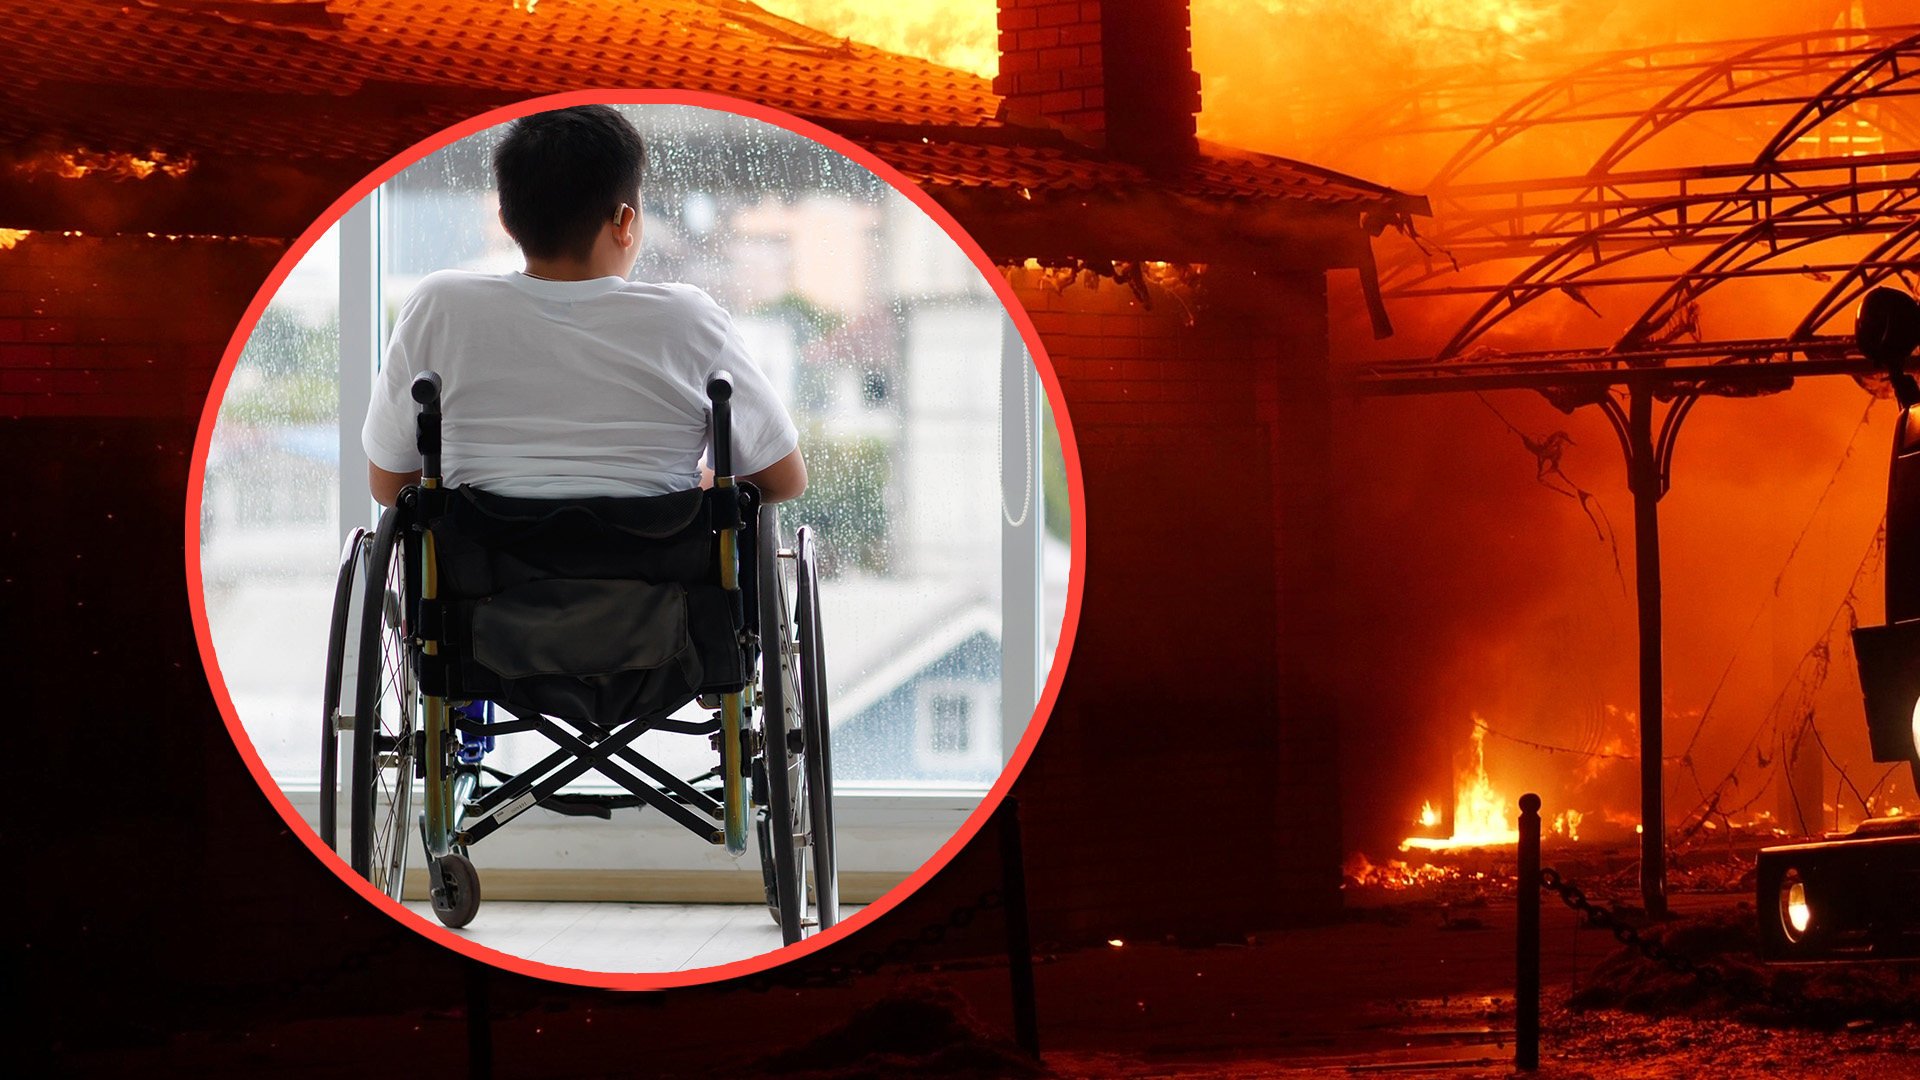 Despite the insurer’s claim of “self-inflicted” injuries, a Chinese court awarded a man US$80,000 after he was severely injured while rescuing his family from a fire.  Photo: SCMP composite/Shutterstock